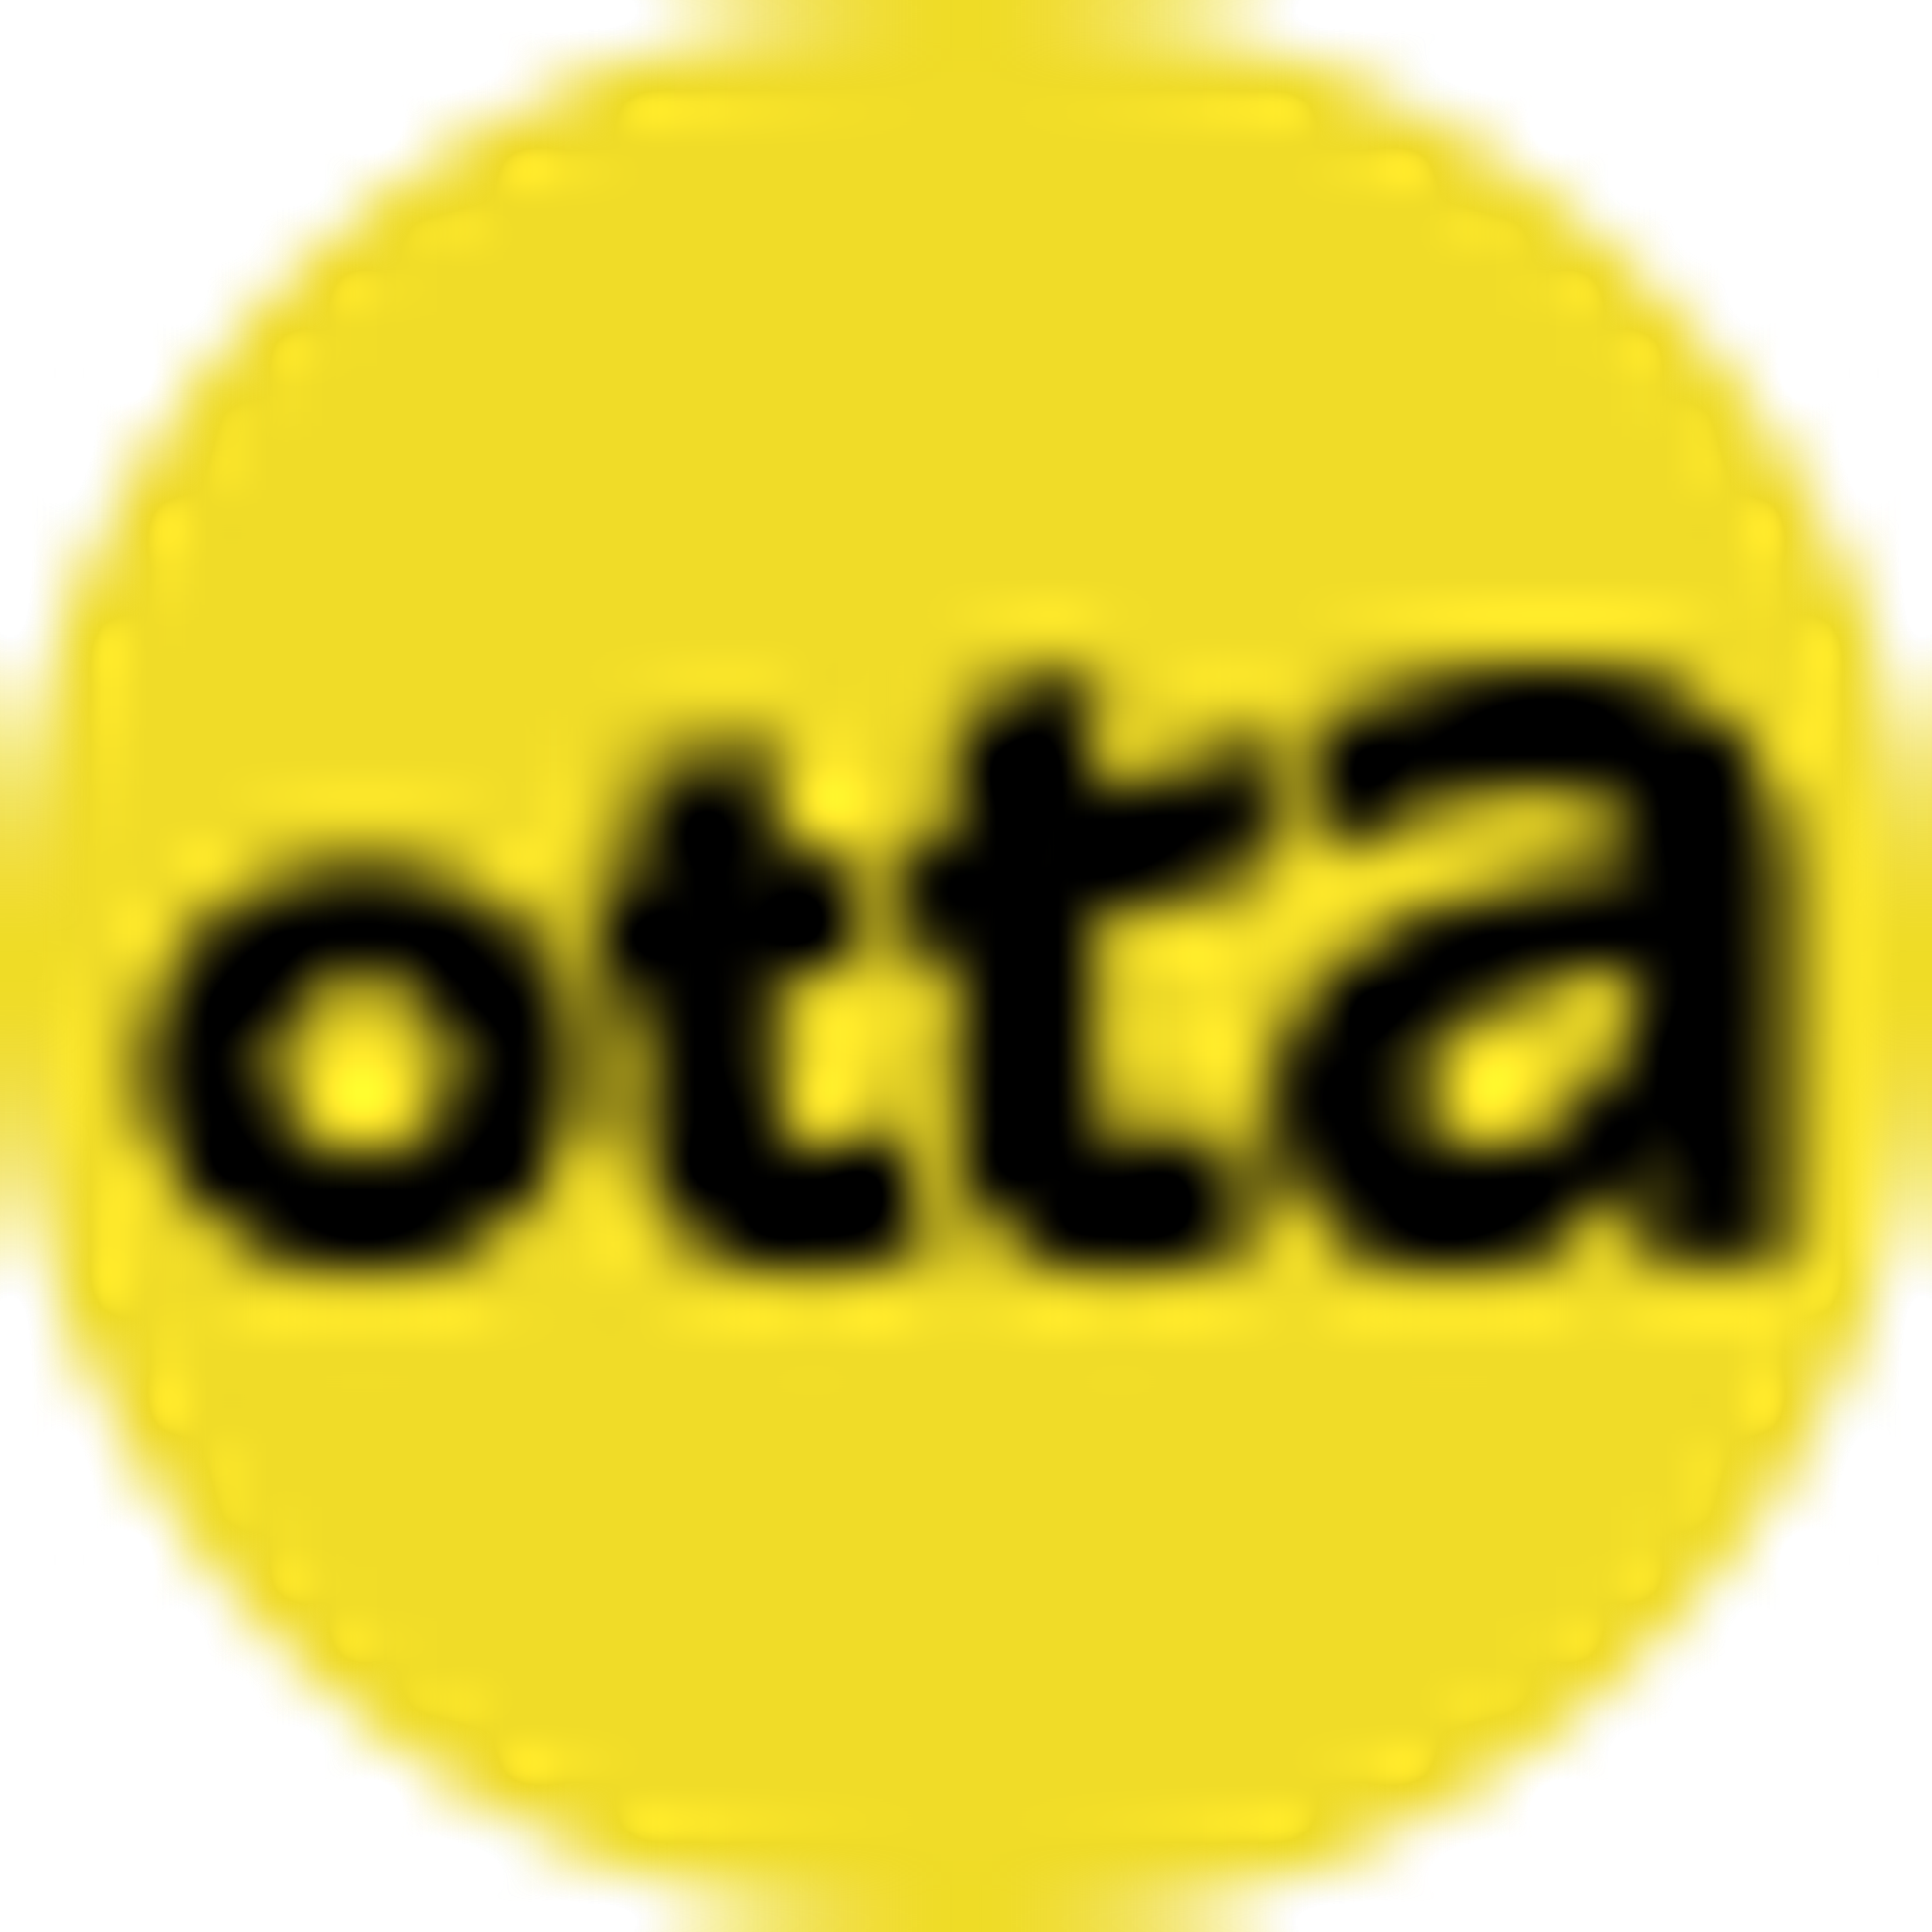 Otta - Your calling is calling